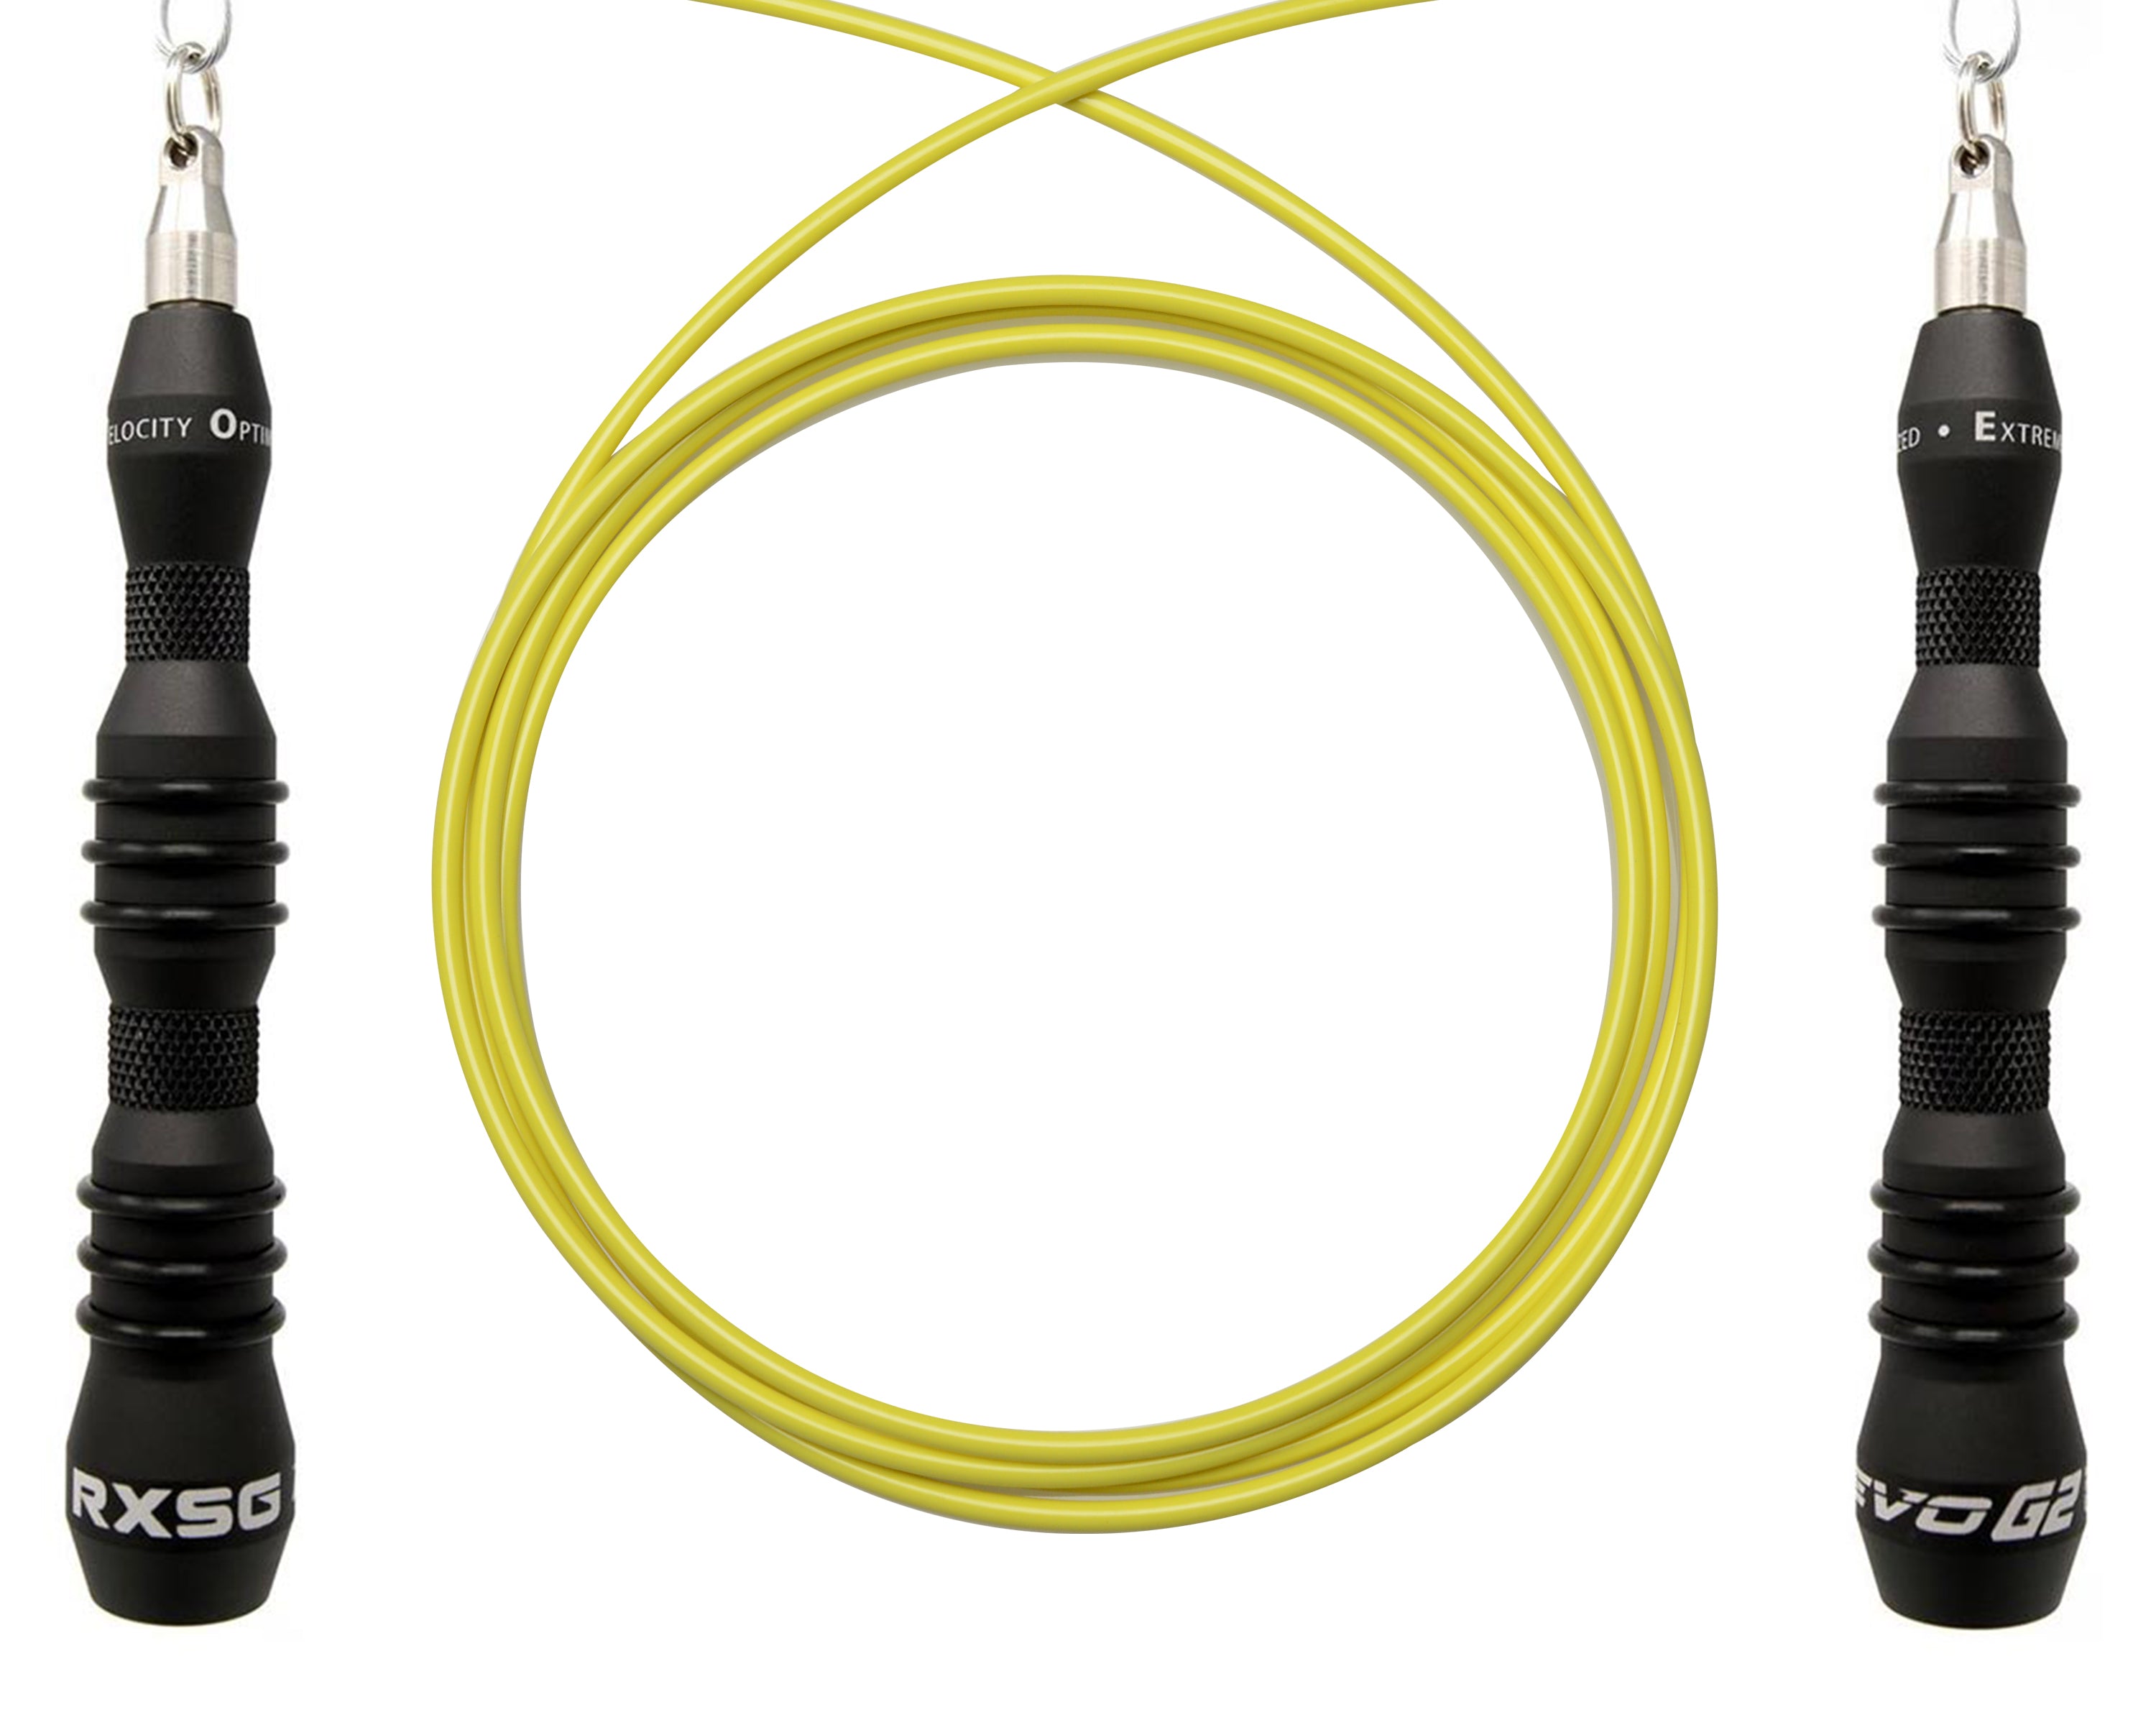 EVO G2 Speed Rope with Yellow Cable